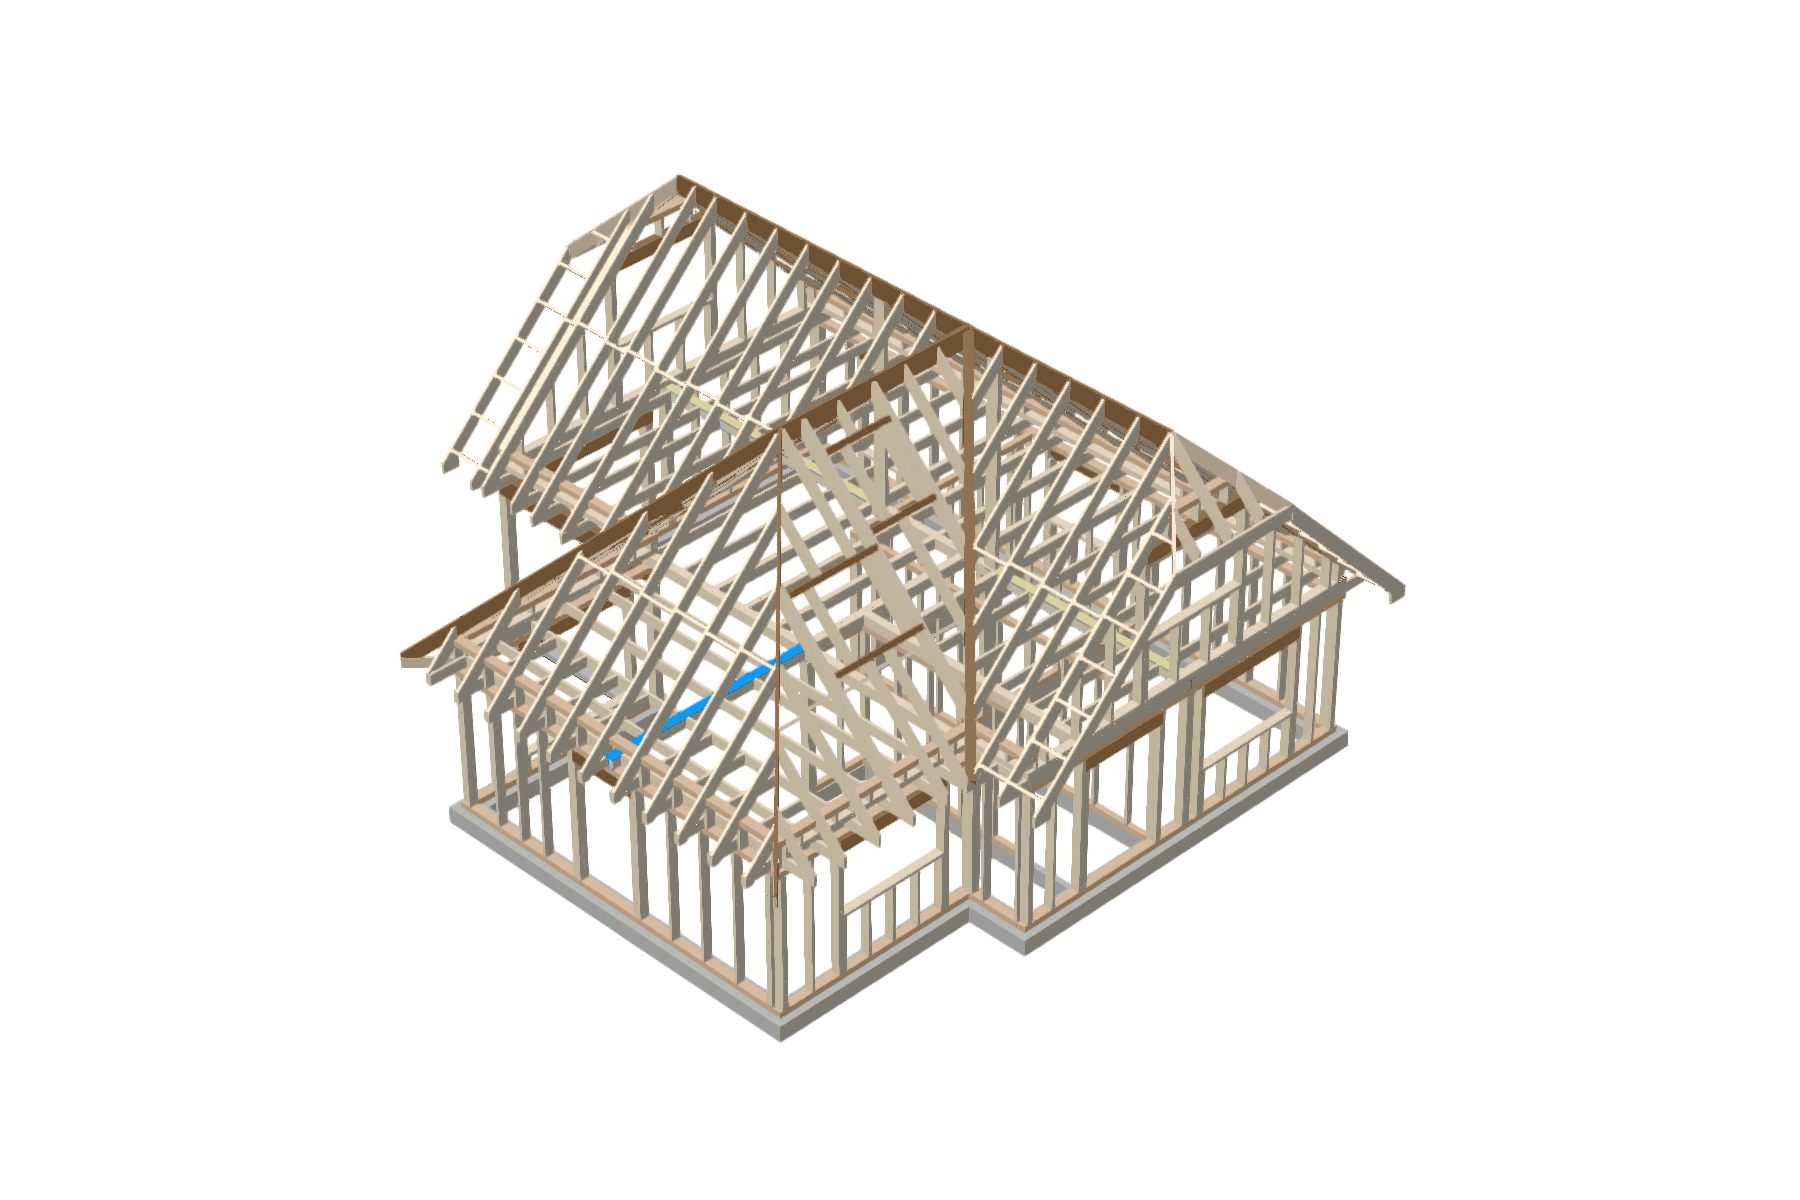 3D animation of an engineered timber frame designed specifically for hempcrete installation